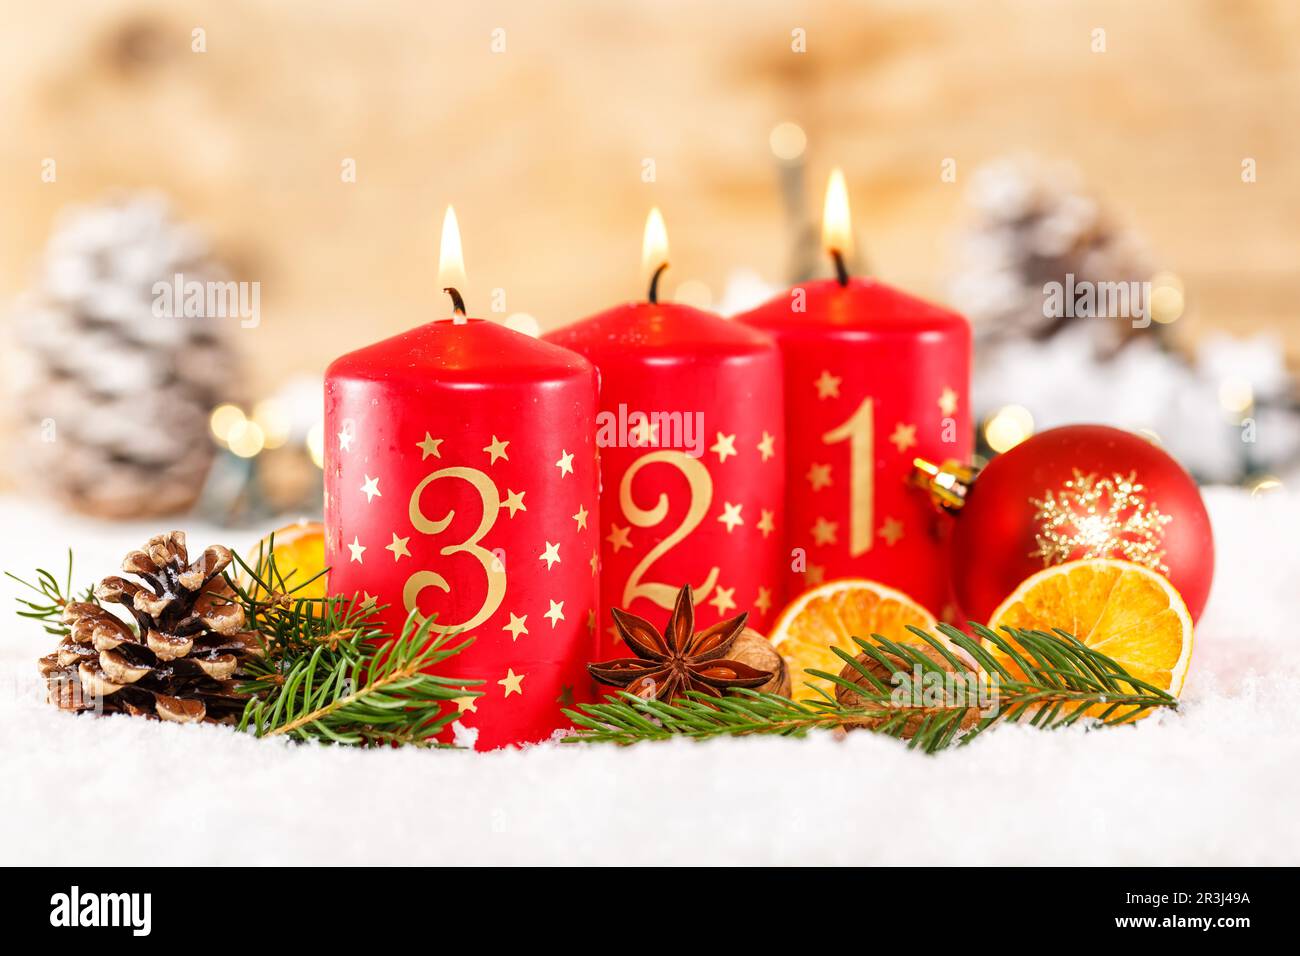 Stock 3rd Decoration Third Photo Candle Alamy Advent Advent Season with Christmas - Decoration Christmas